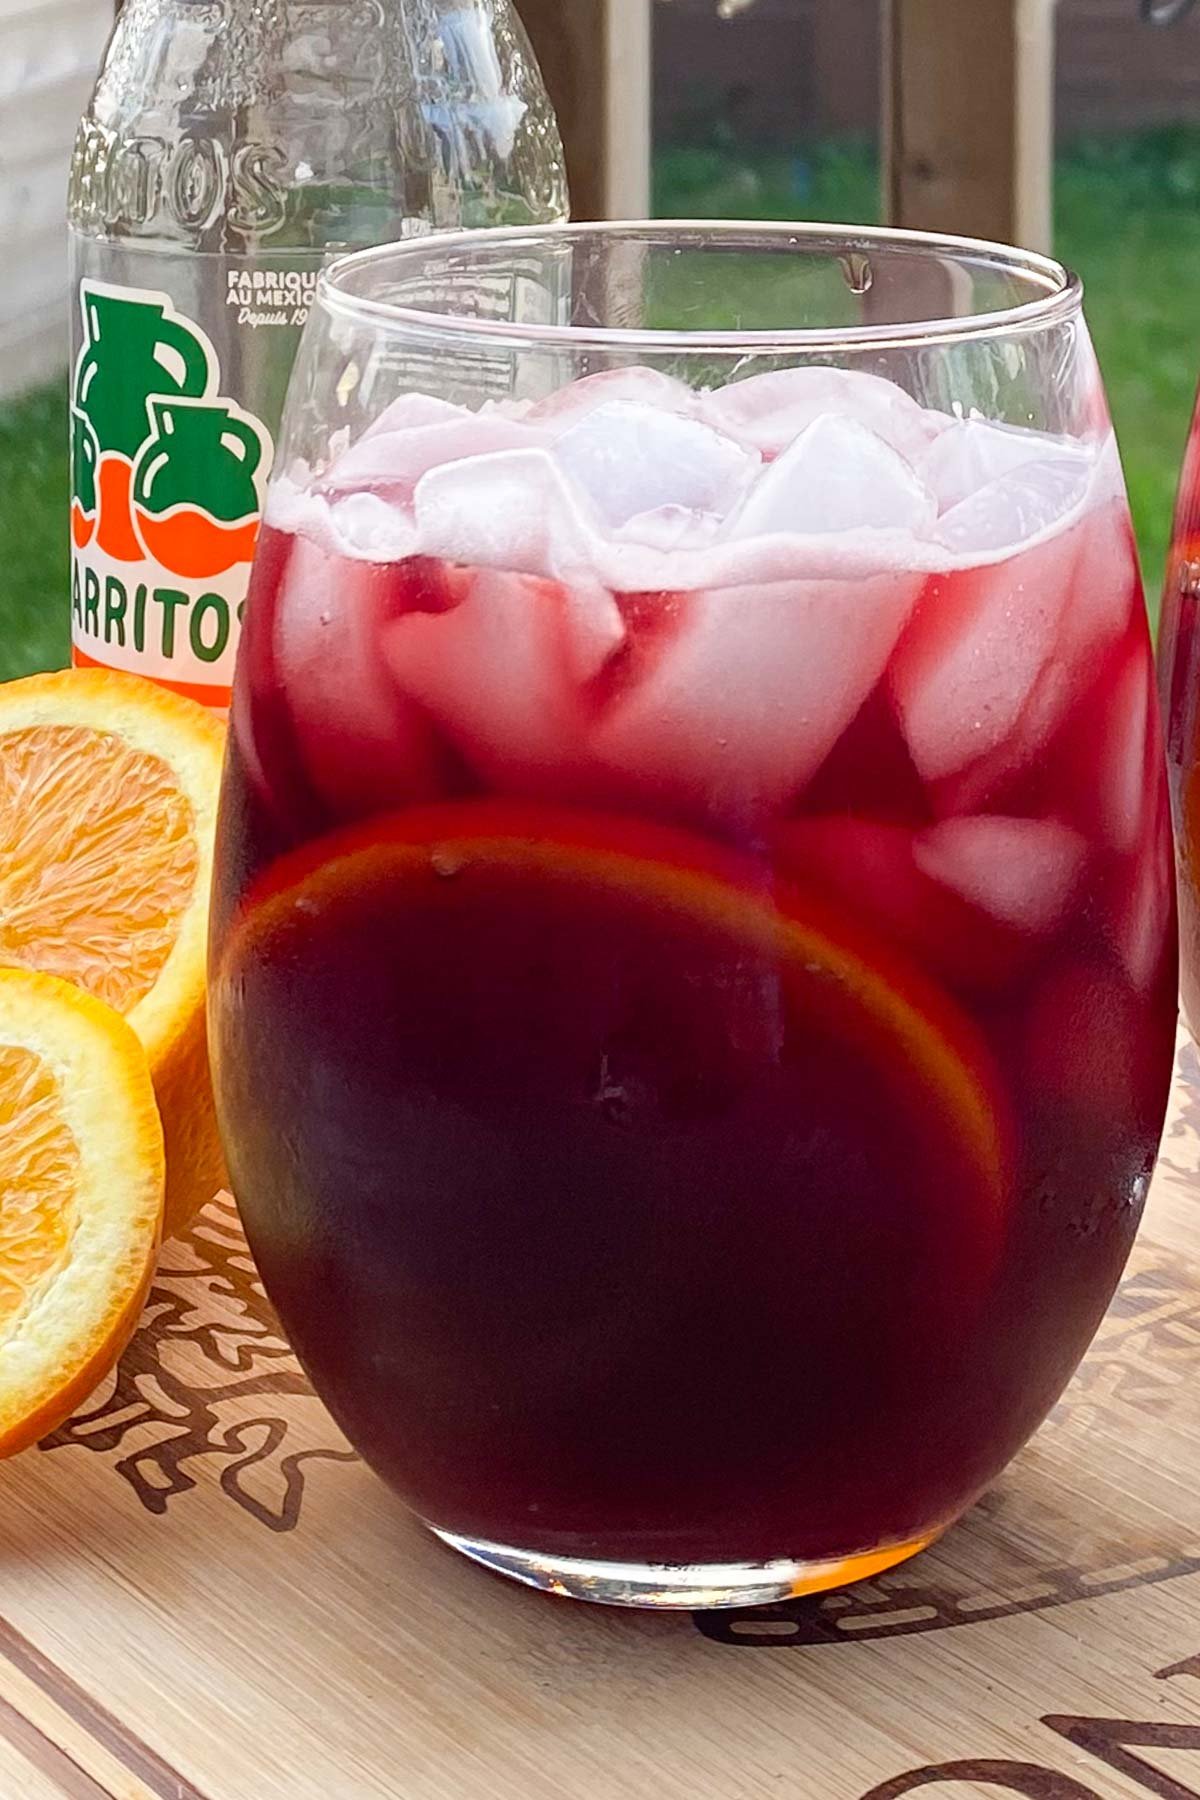 Glasses of red wine with orange slice and ice cubes.